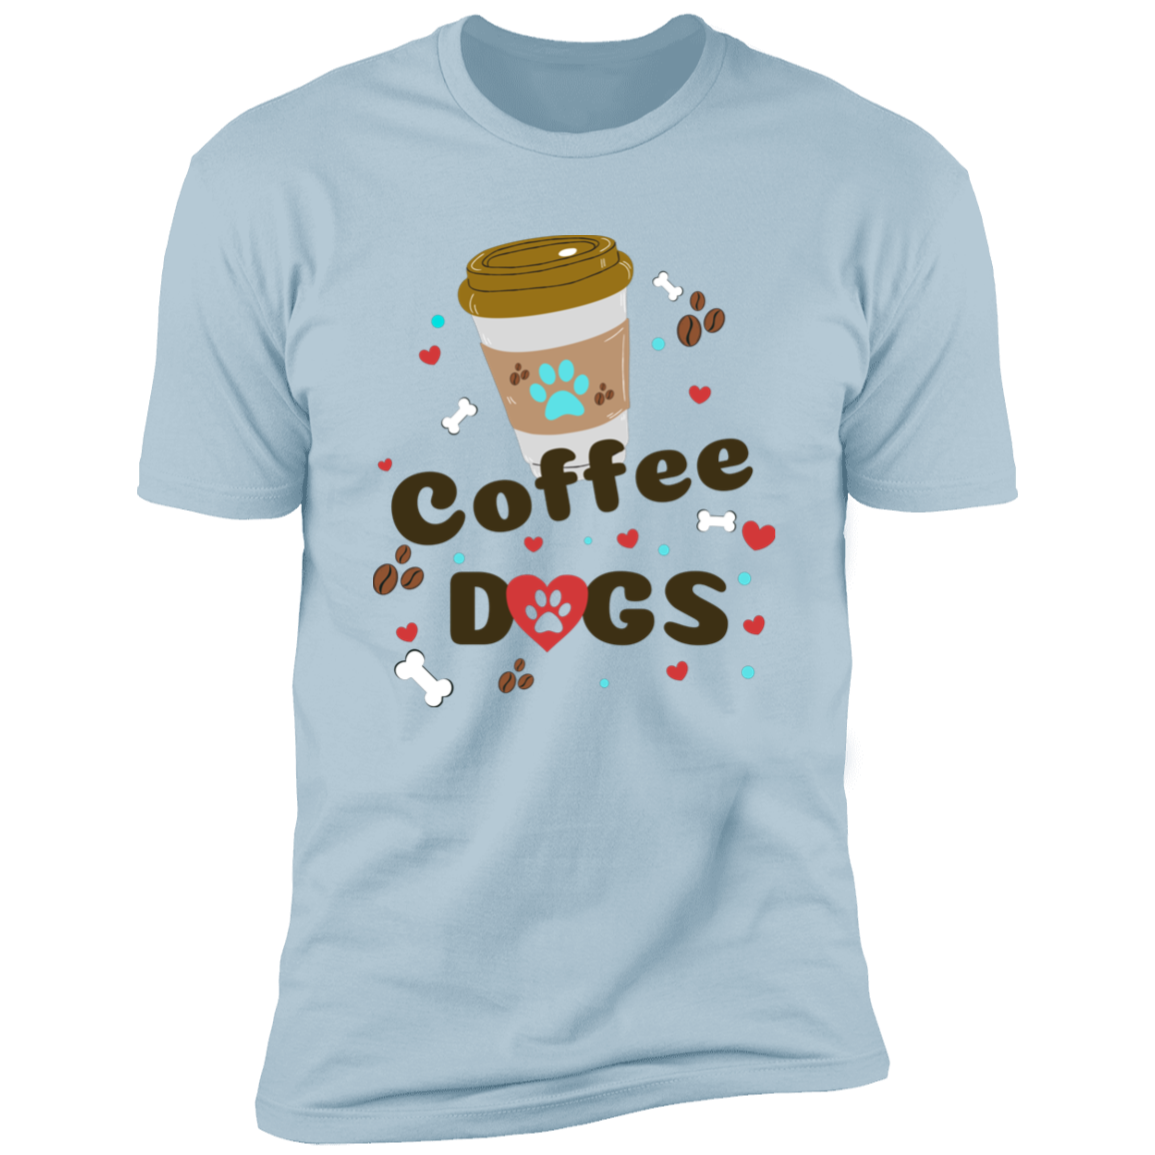 To go Coffee Dogs T-shirt, Dog Shirt for humans, in light blue